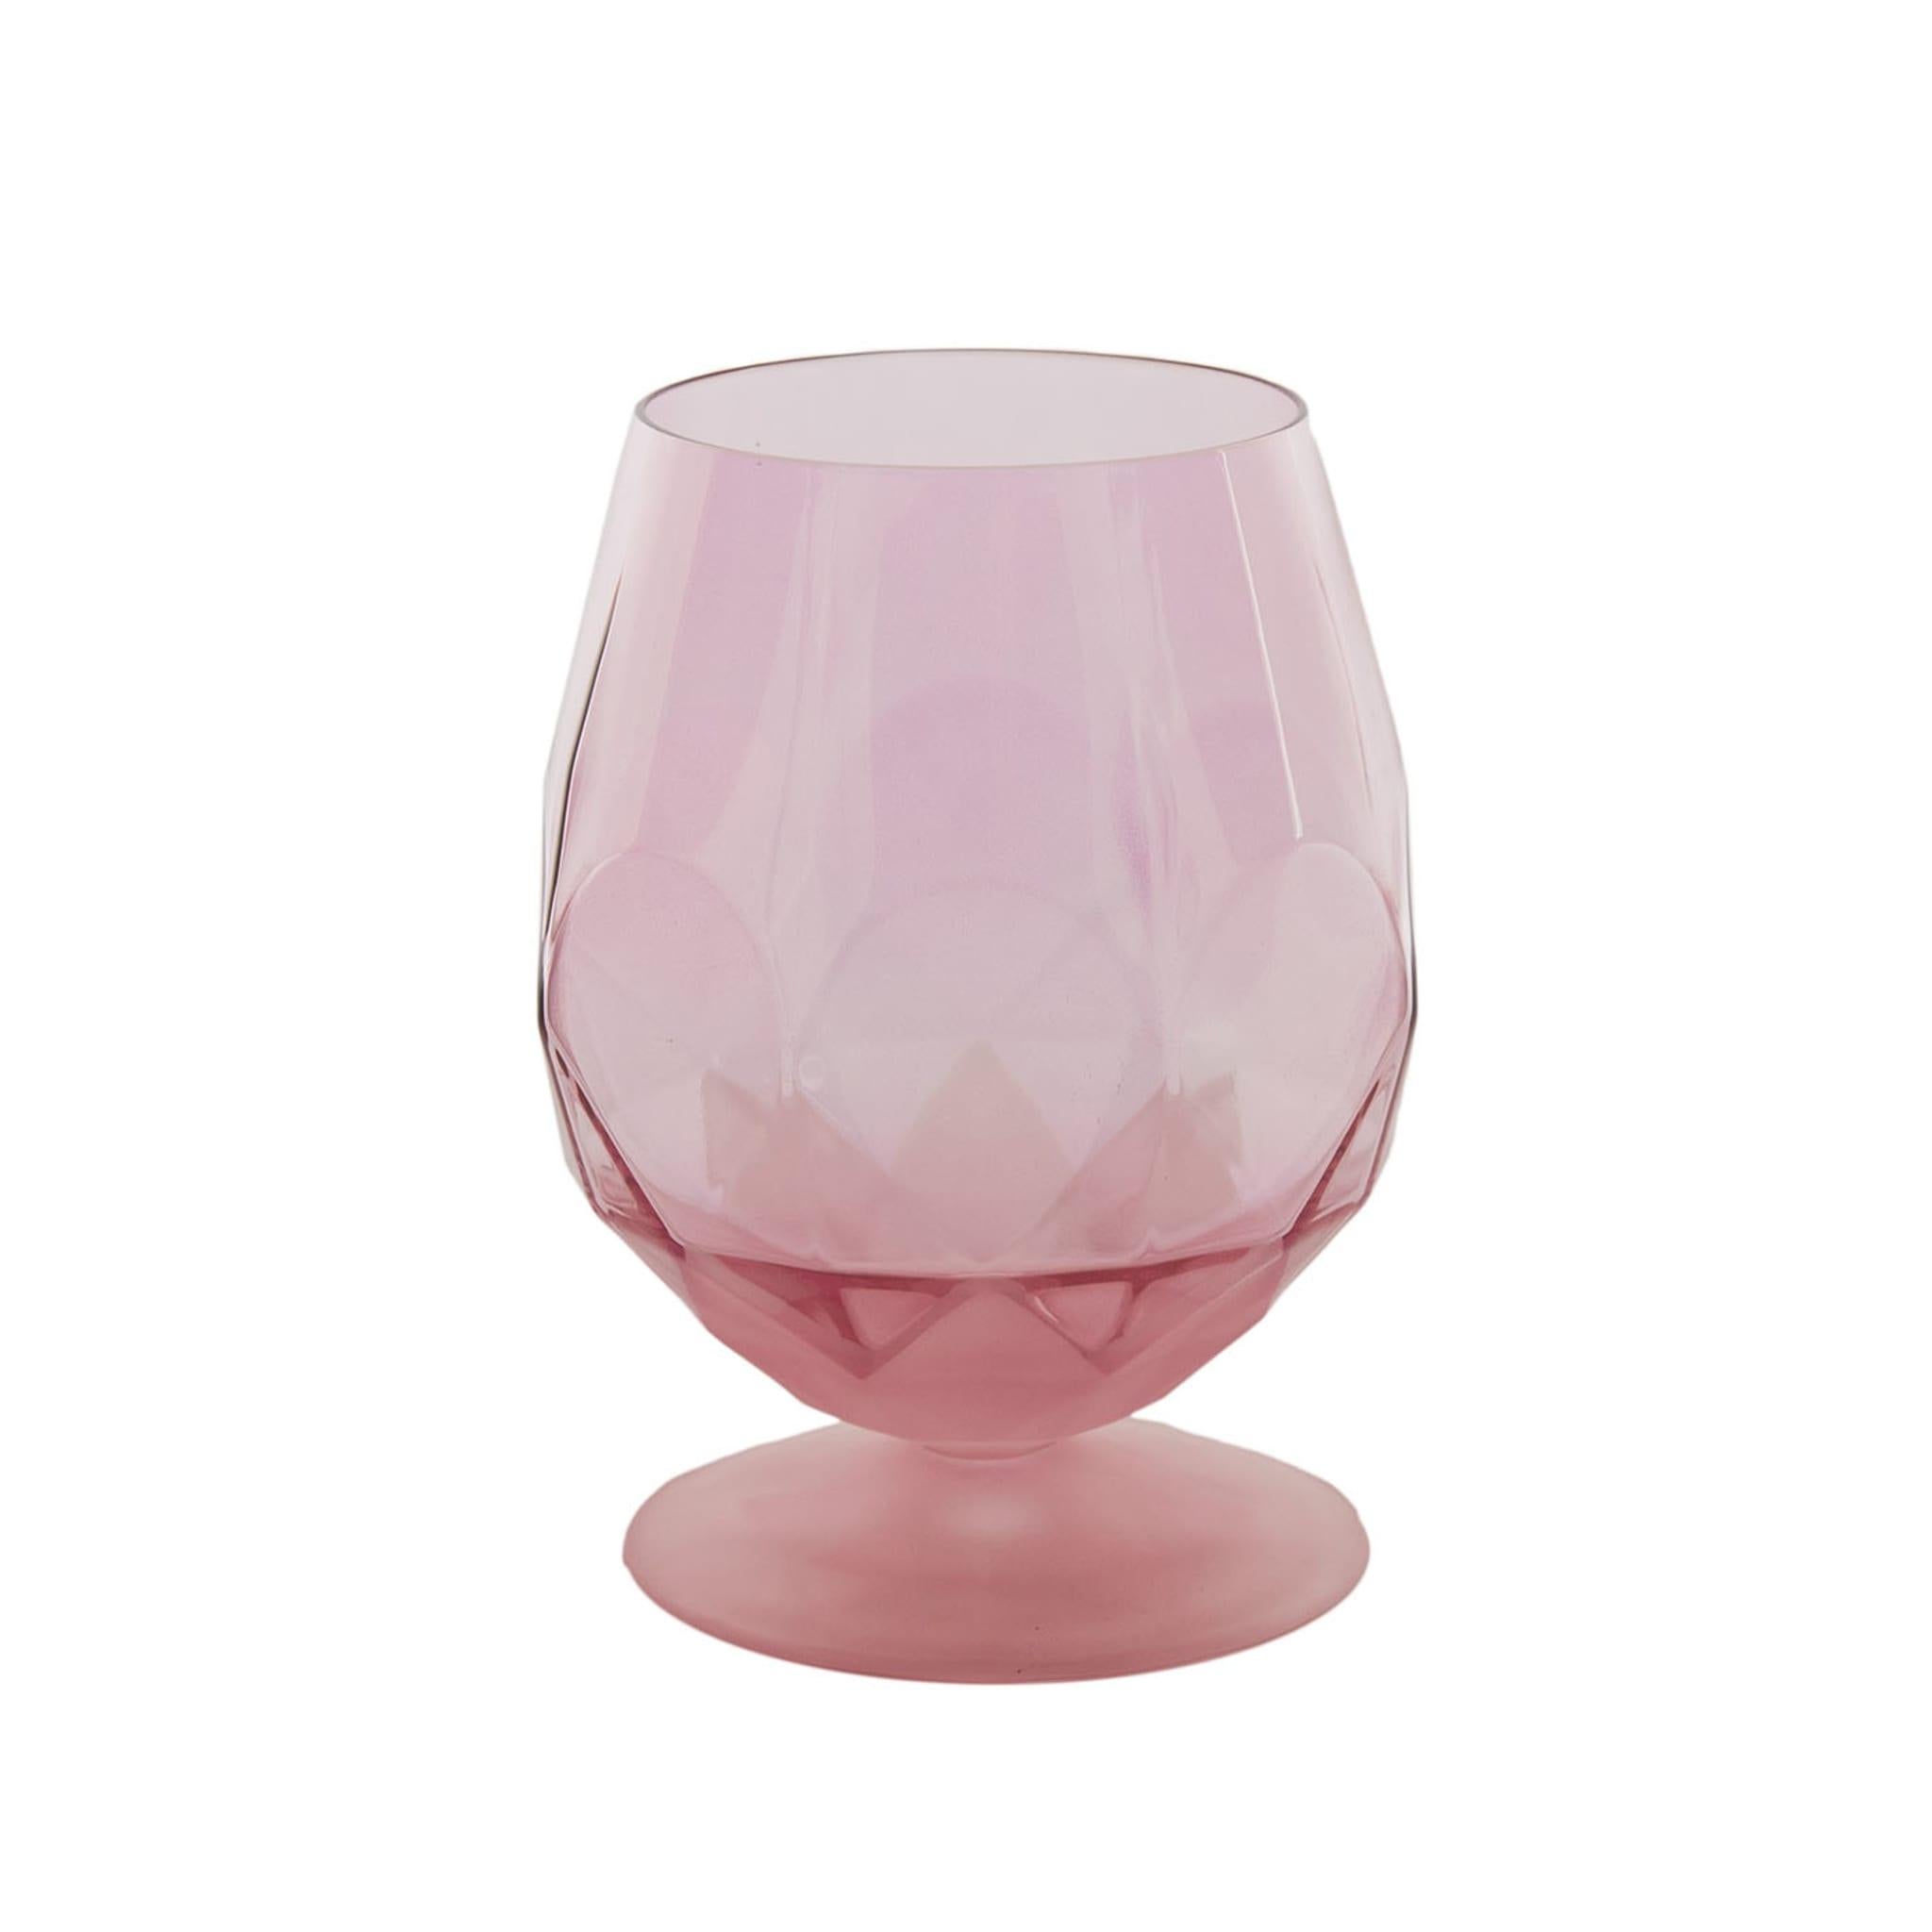 Modern and sophisticated aesthetic meets the lively character of a rainbow palette in this singular glassware set, composed of six glasses. Featuring a round base sustaining a bulging and capacious bowl, each piece is fashioned of sandblasted glass